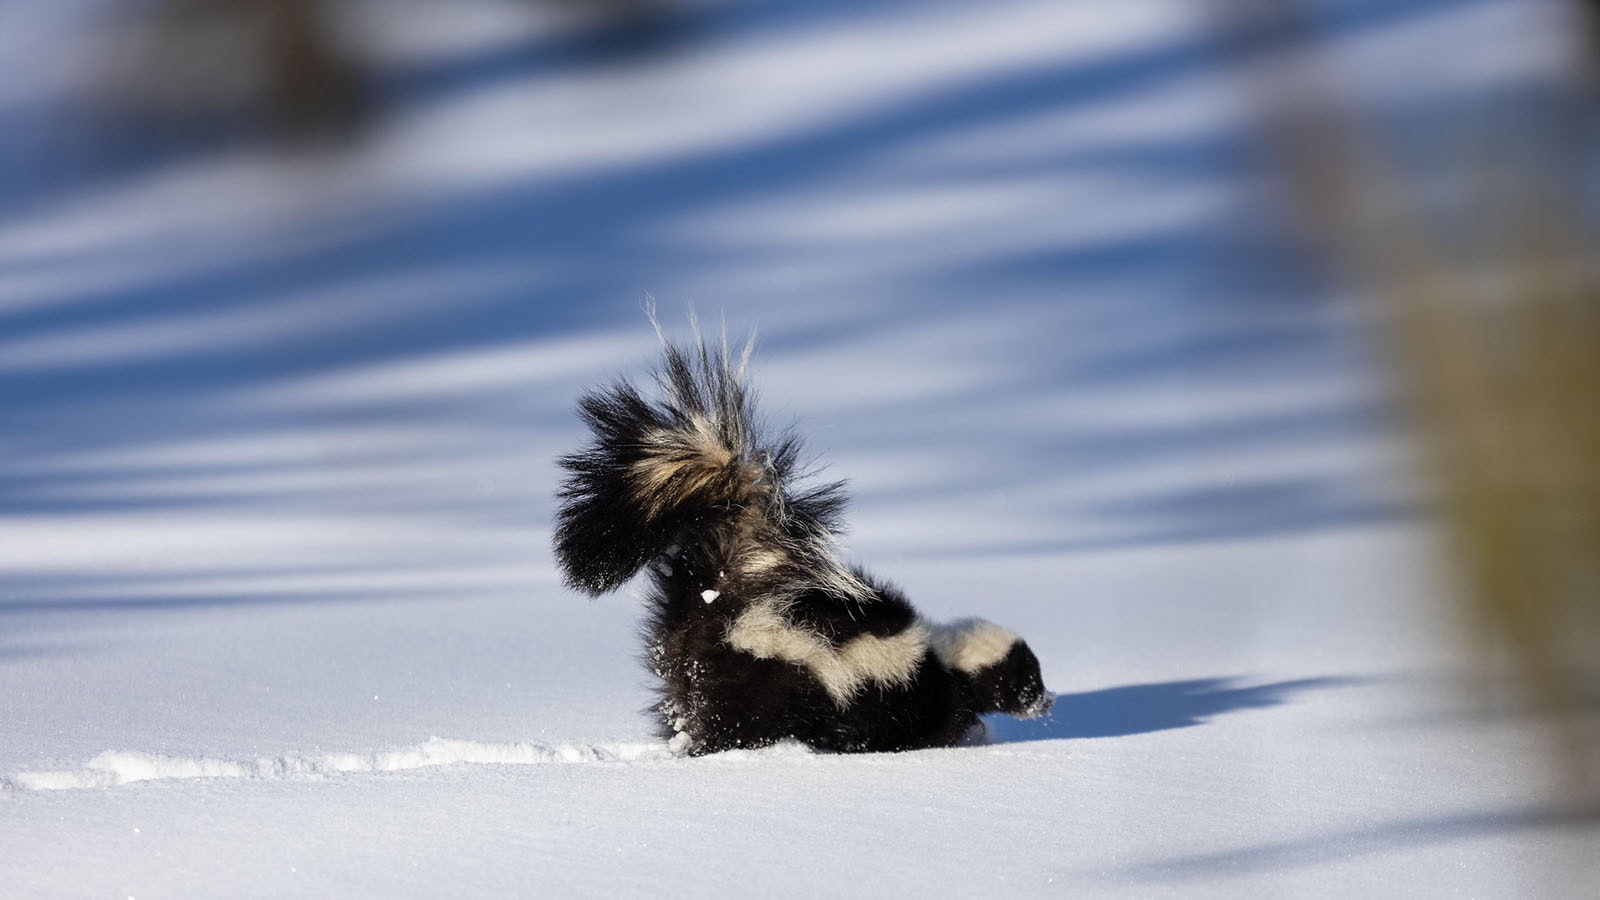 For many, skunk activity signals spring is sprung.